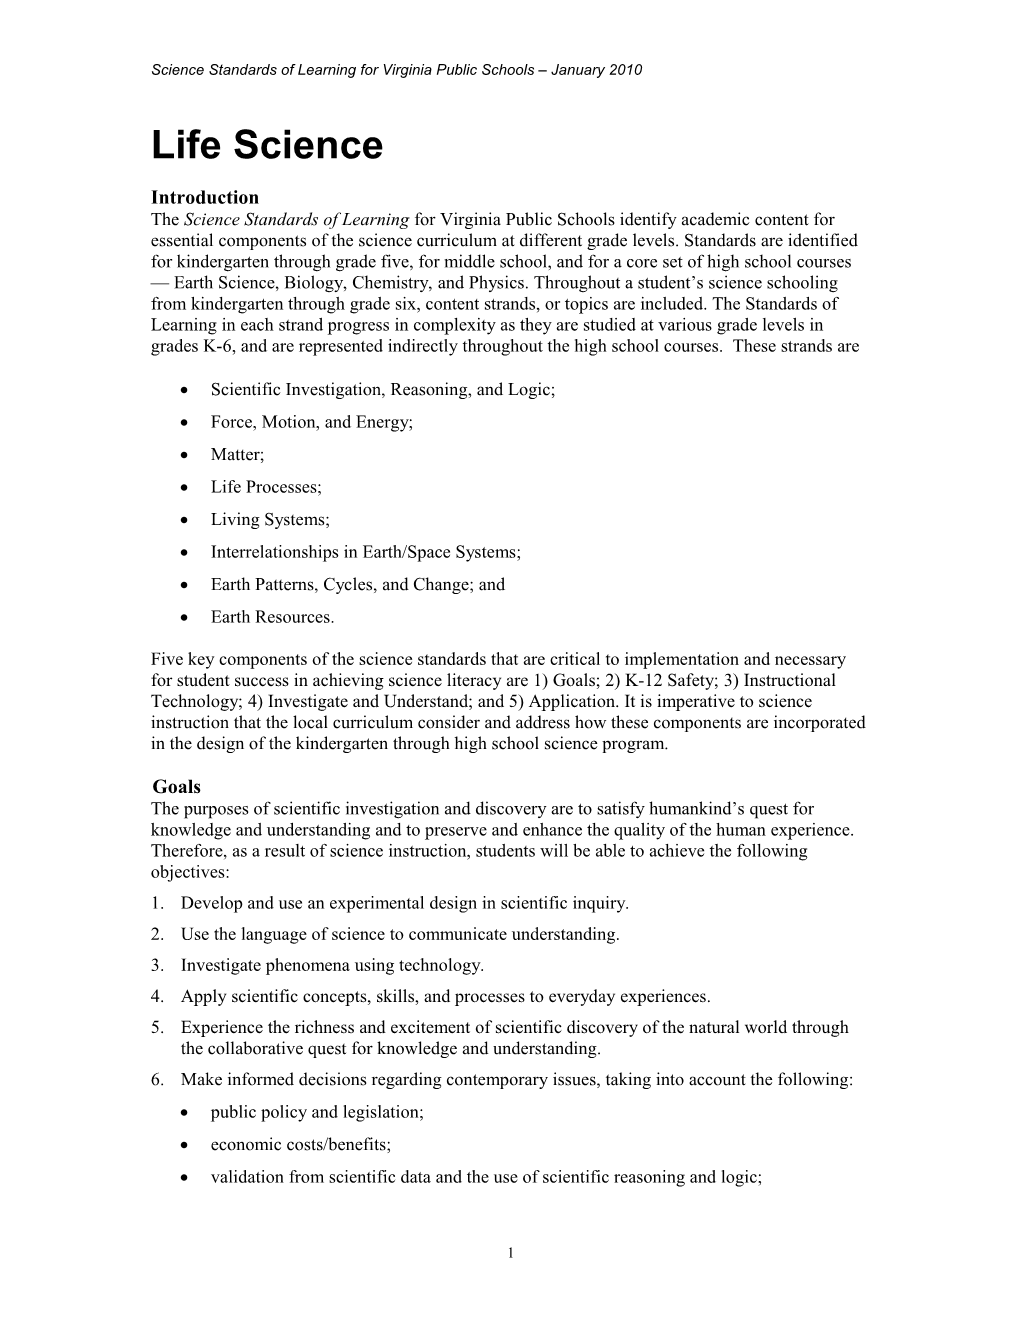 Science Standards of Learning for Virginia Public Schools January 2010 s1